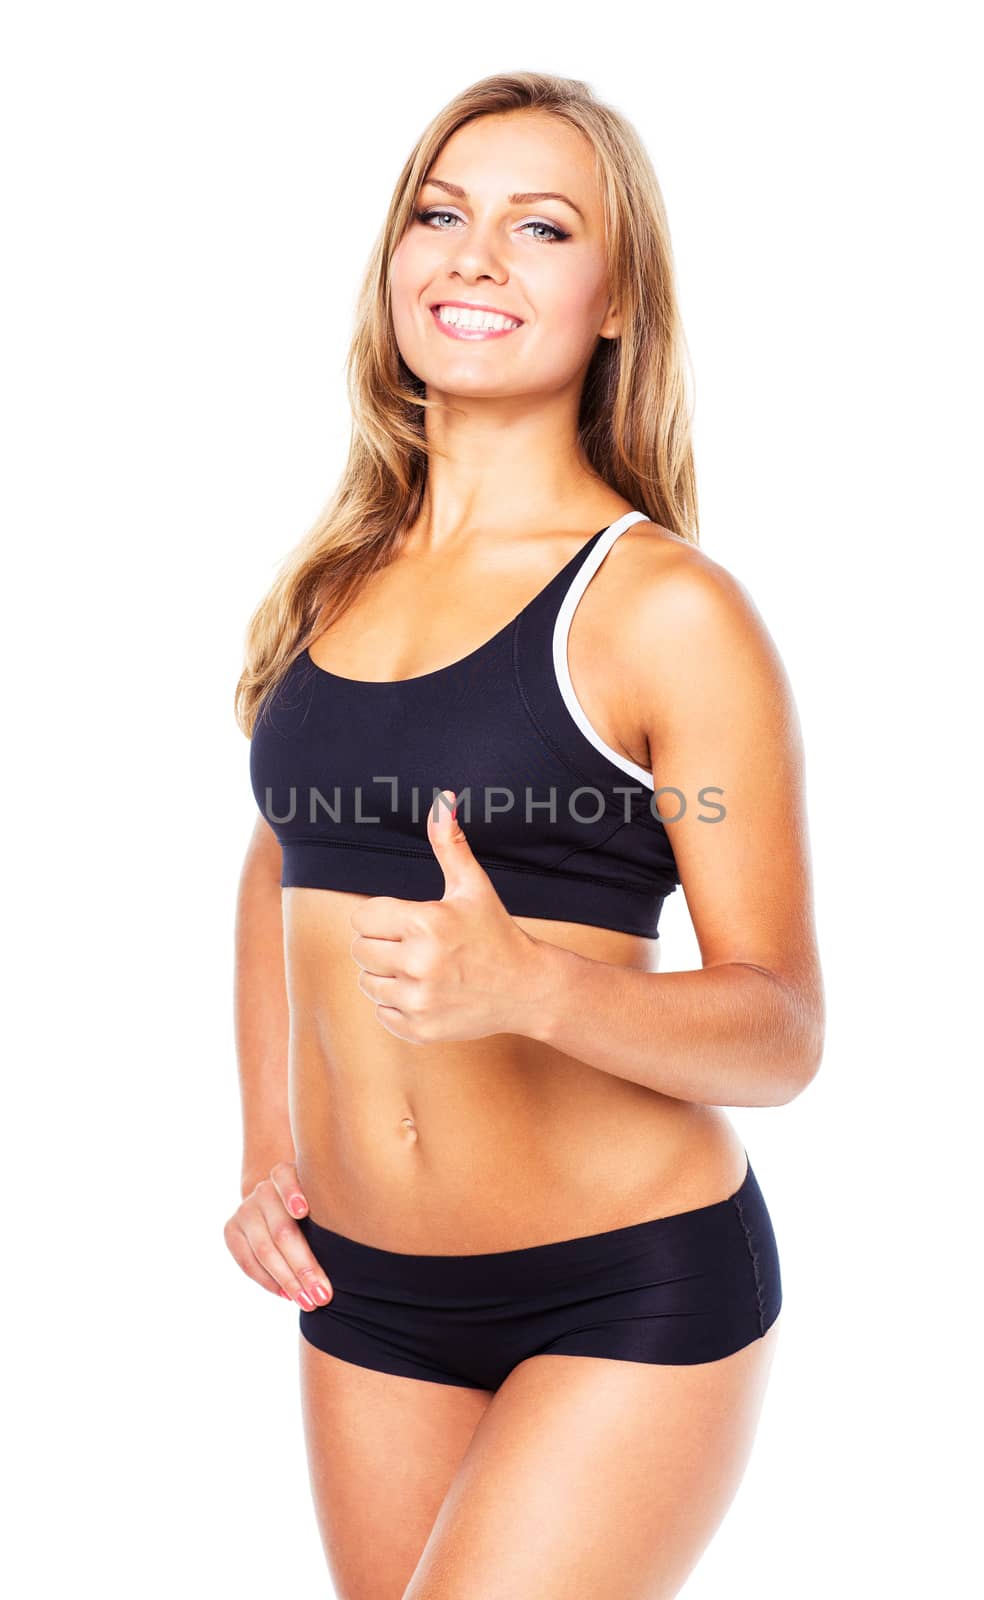 Young athletic girl with a finger up on white background